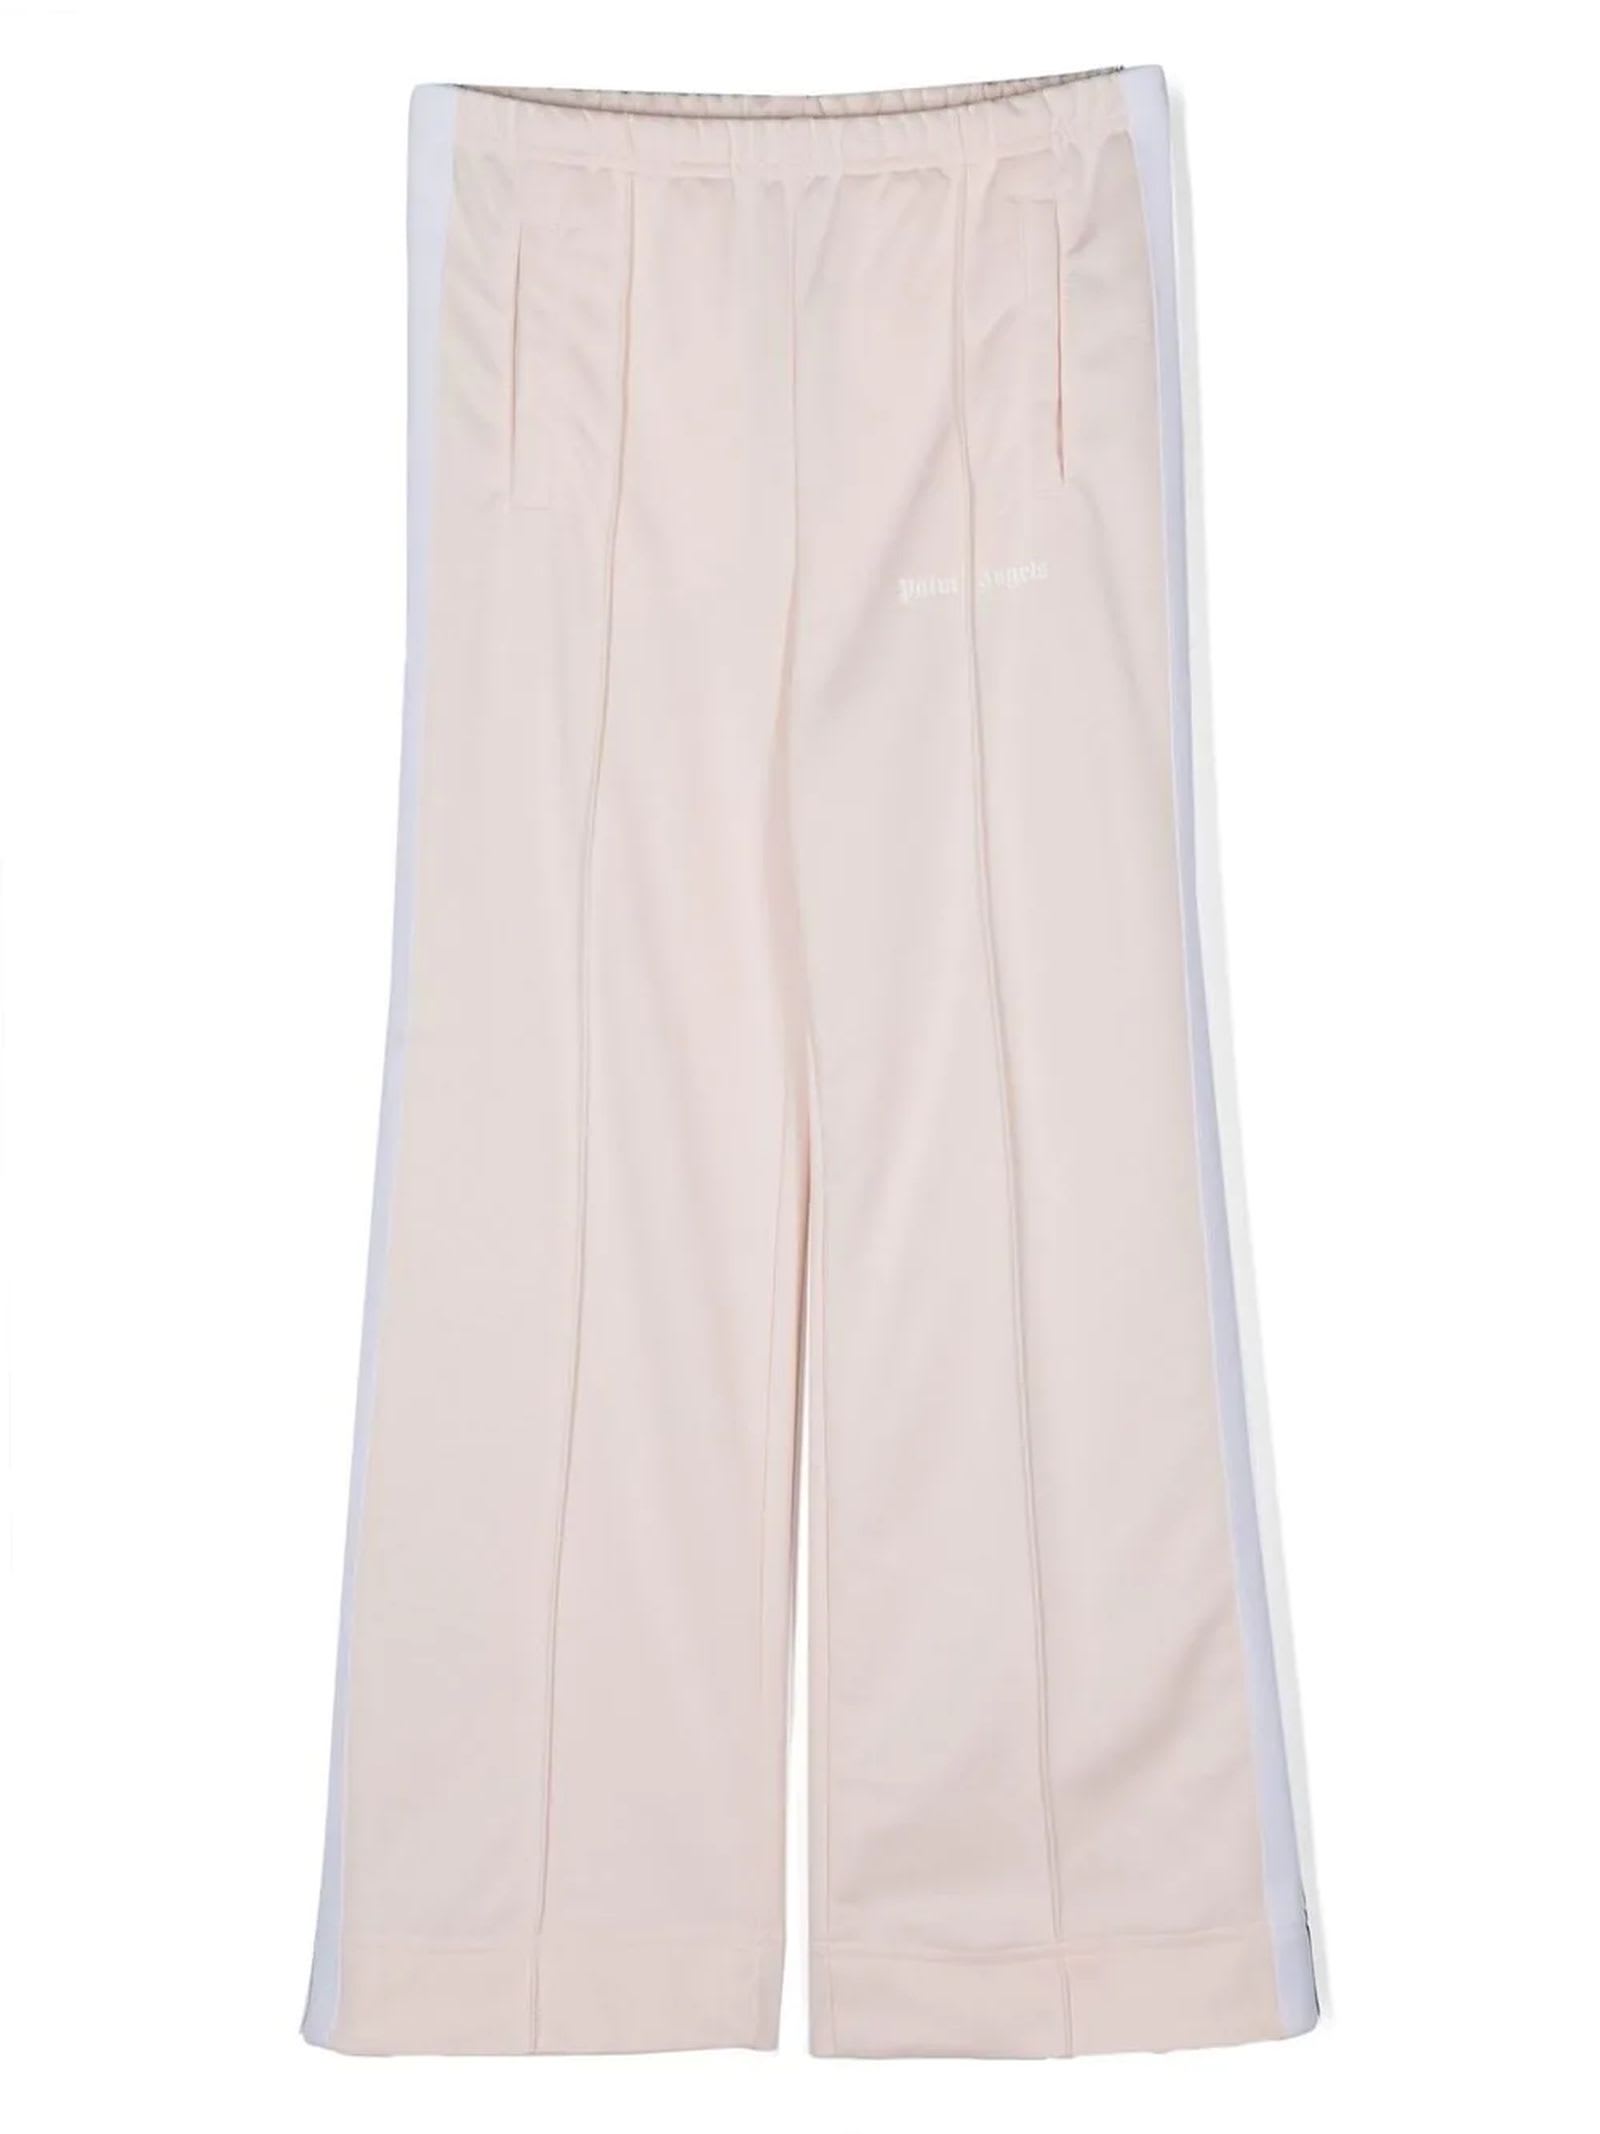 PALM ANGELS PINK POLYESTER PANTS